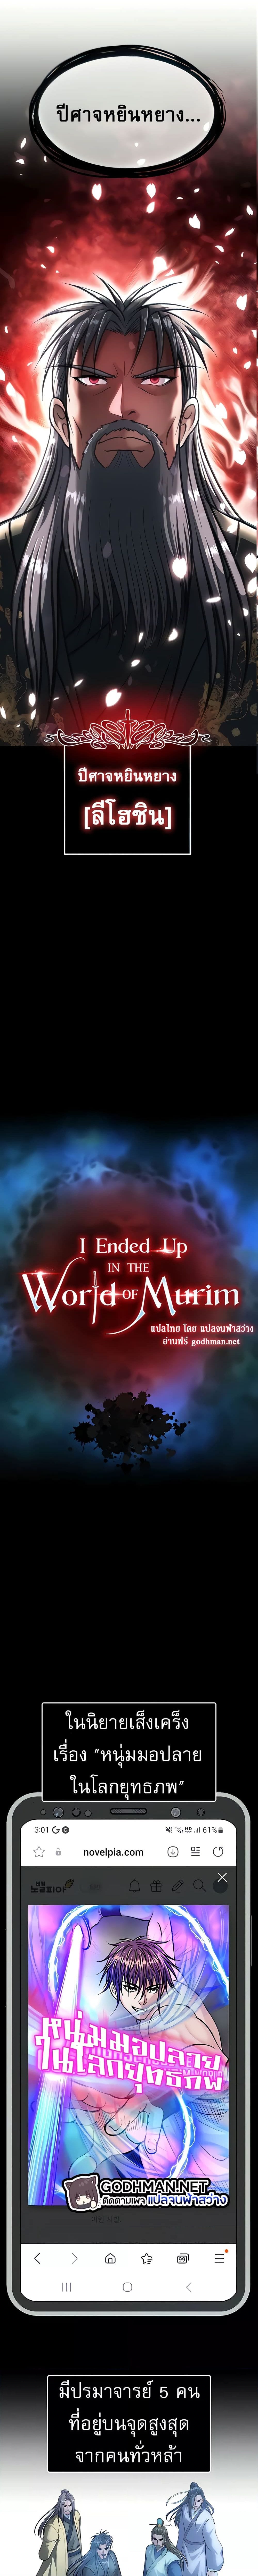 I Ended Up in the World of Murim ตอนที่ 5 ภาพ 1